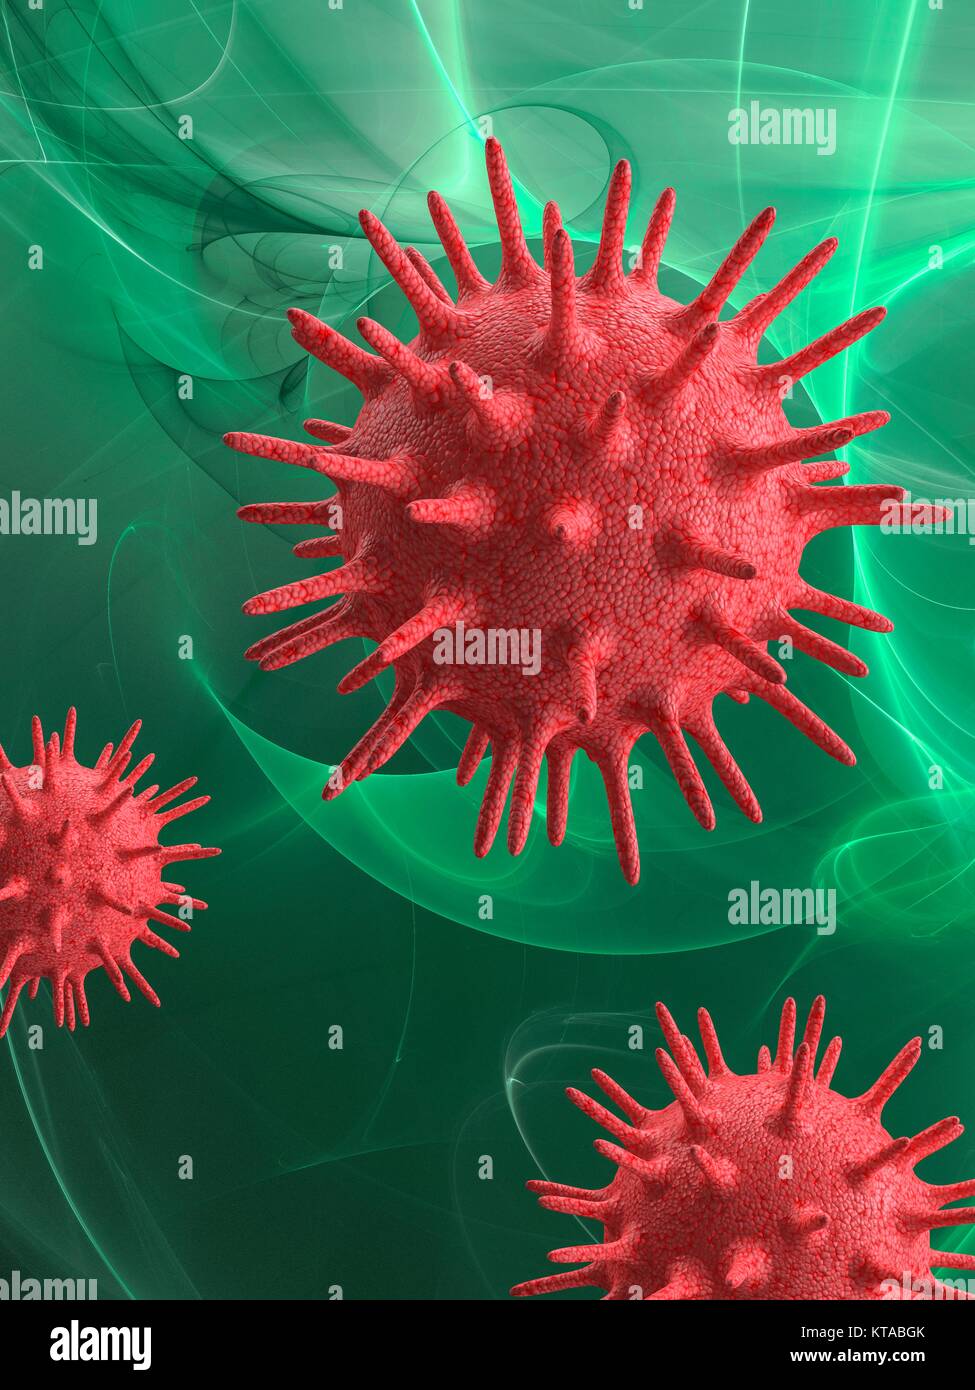 Medical nanoparticles, conceptual computer illustration. Medical nanoparticles could be used to deliver genes and other cellular materials to human cells to treat a variety of diseases. Stock Photo